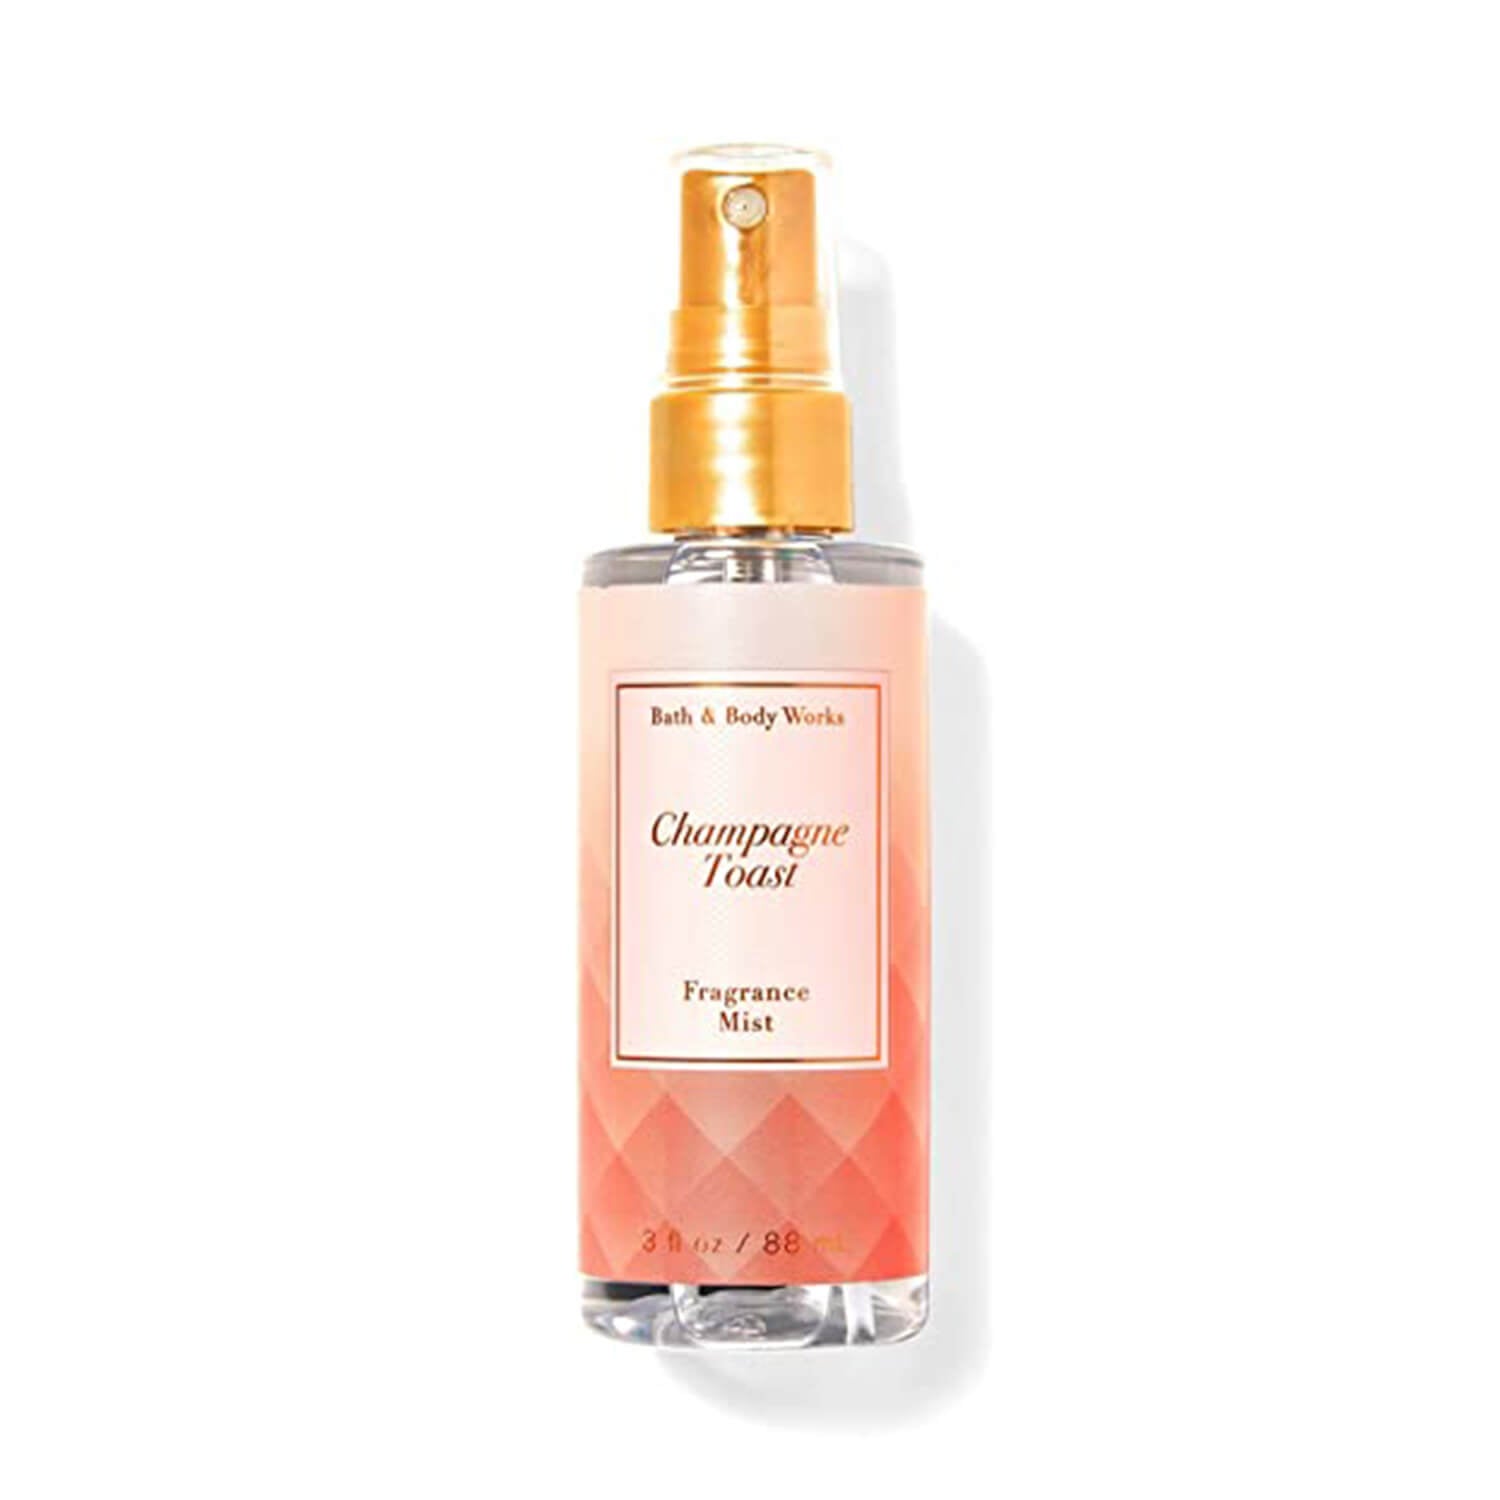 shop bath and body works travel size mist champagne toast available at Heygirl.pk for delivery in Pakistan